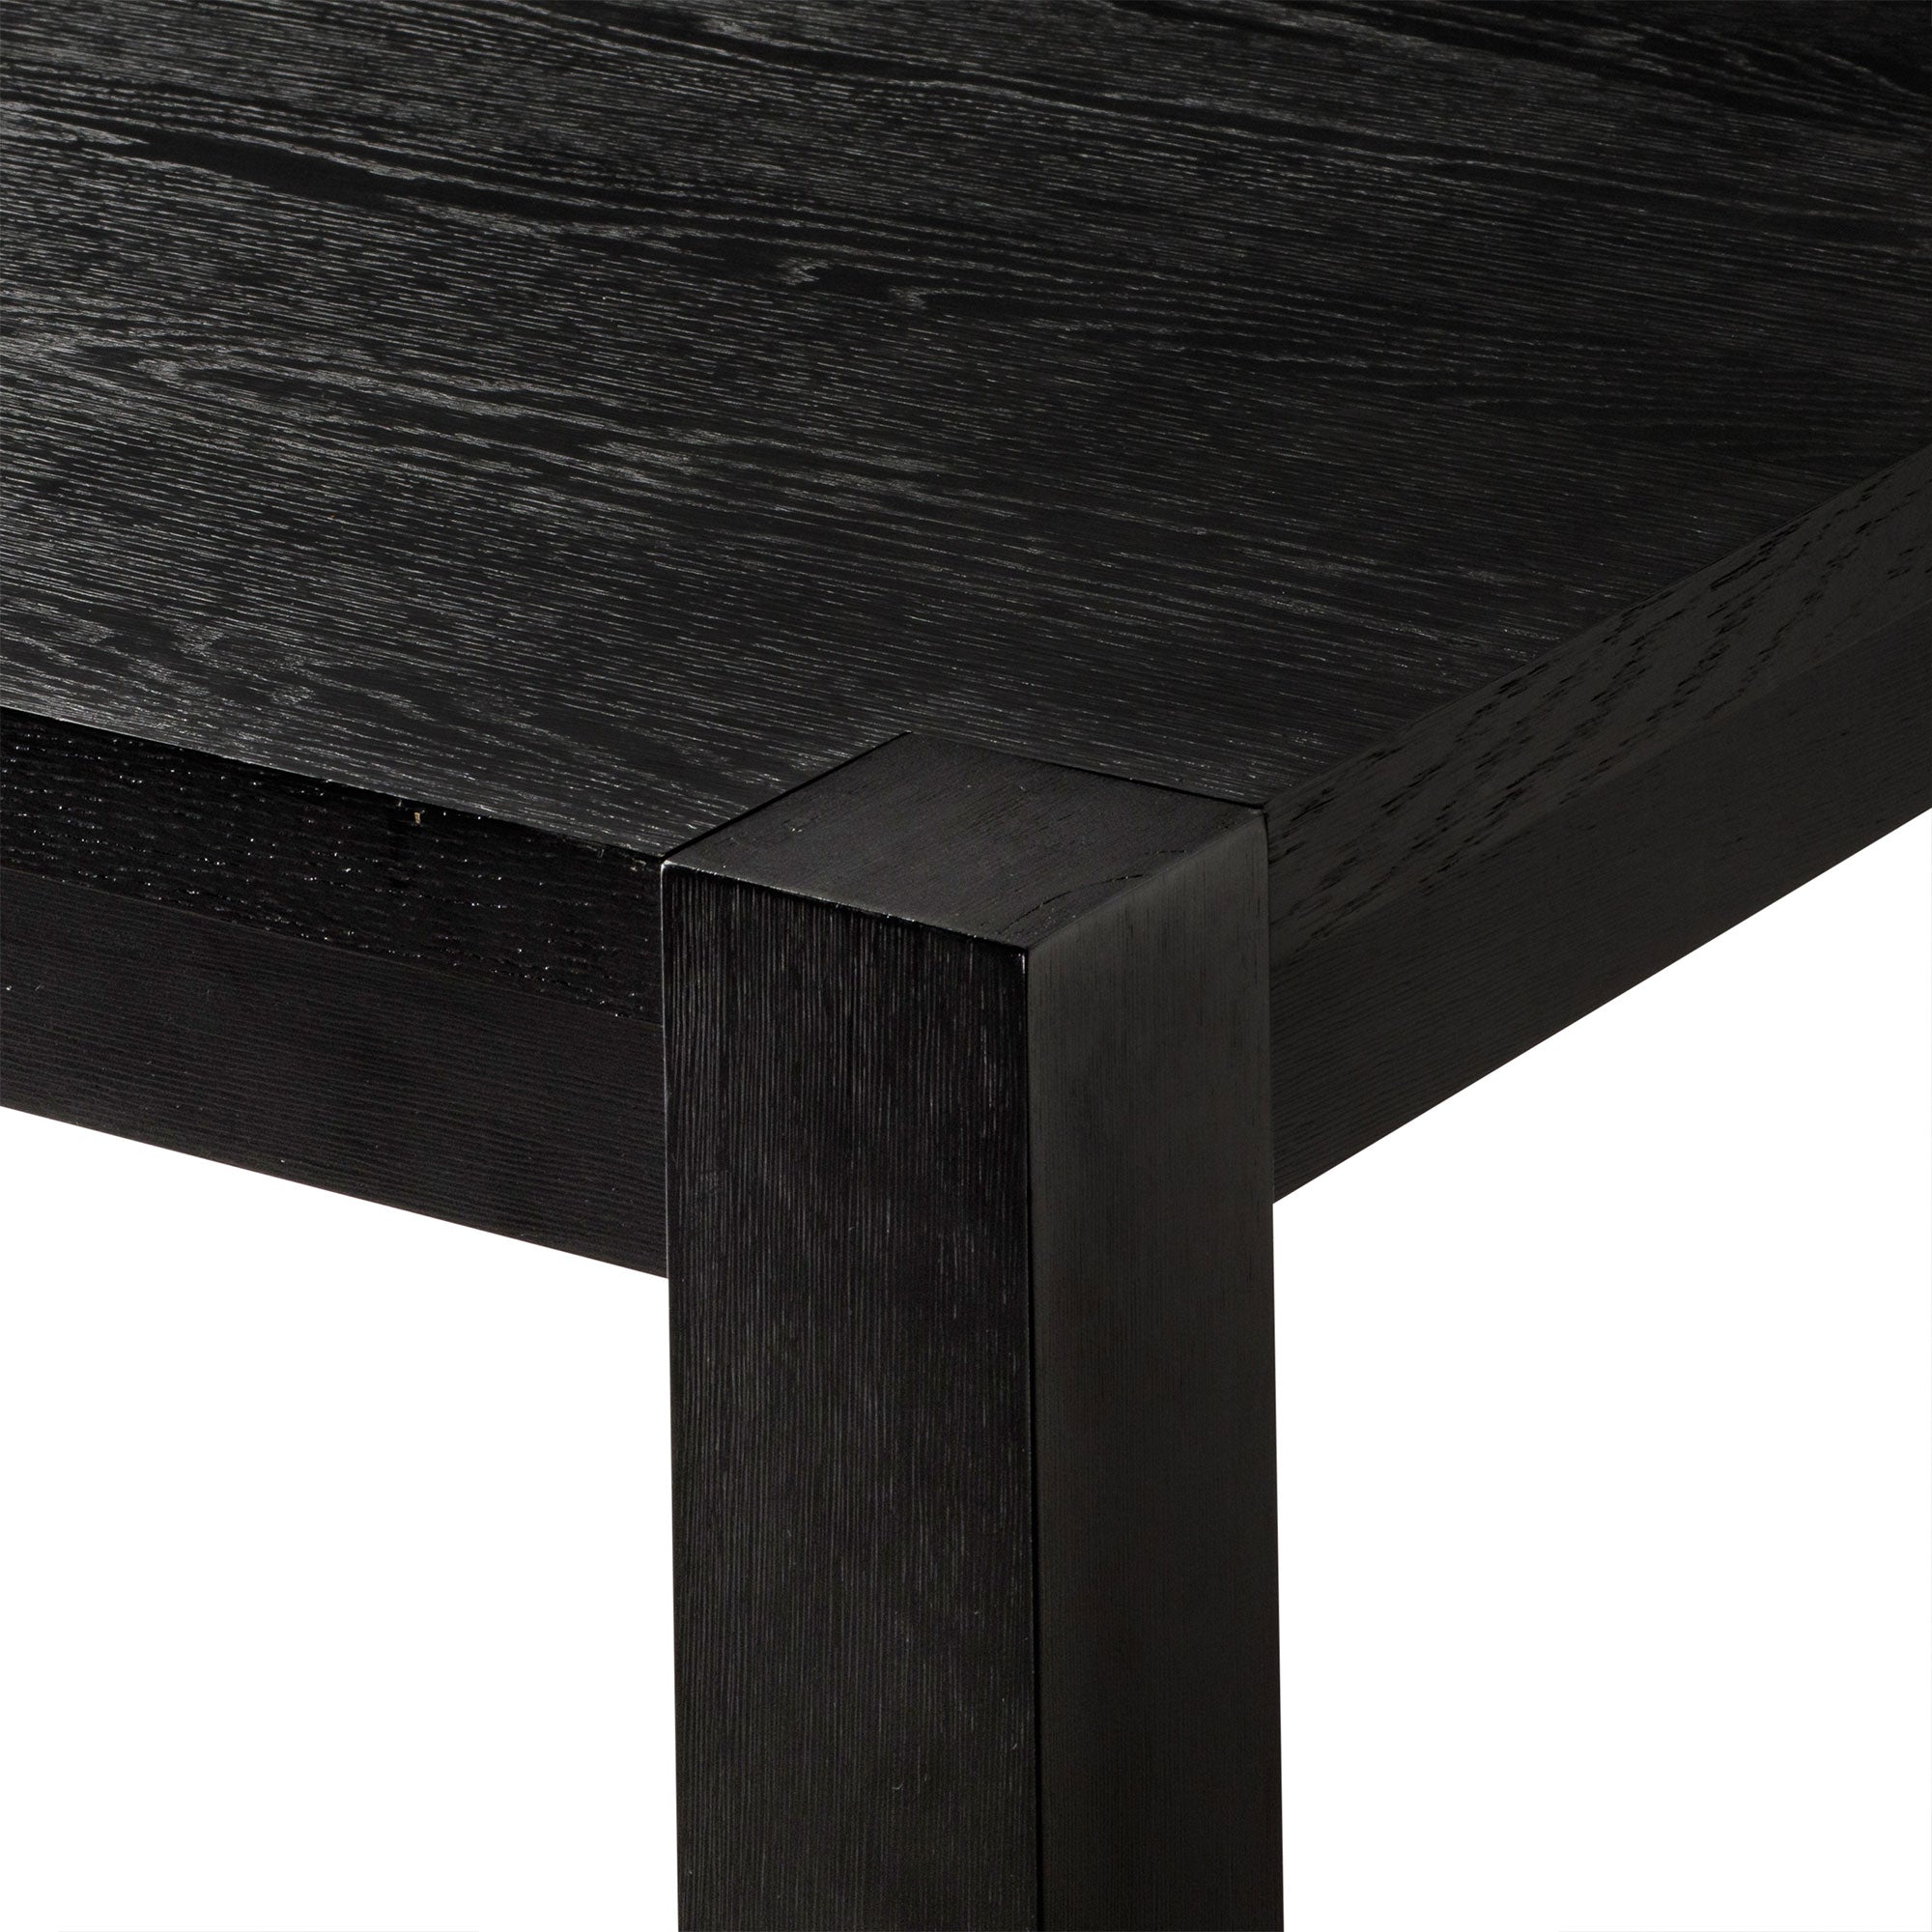 Cleo Contemporary Wooden Dining Table in Refined Black Finish in Dining Furniture by Maven Lane